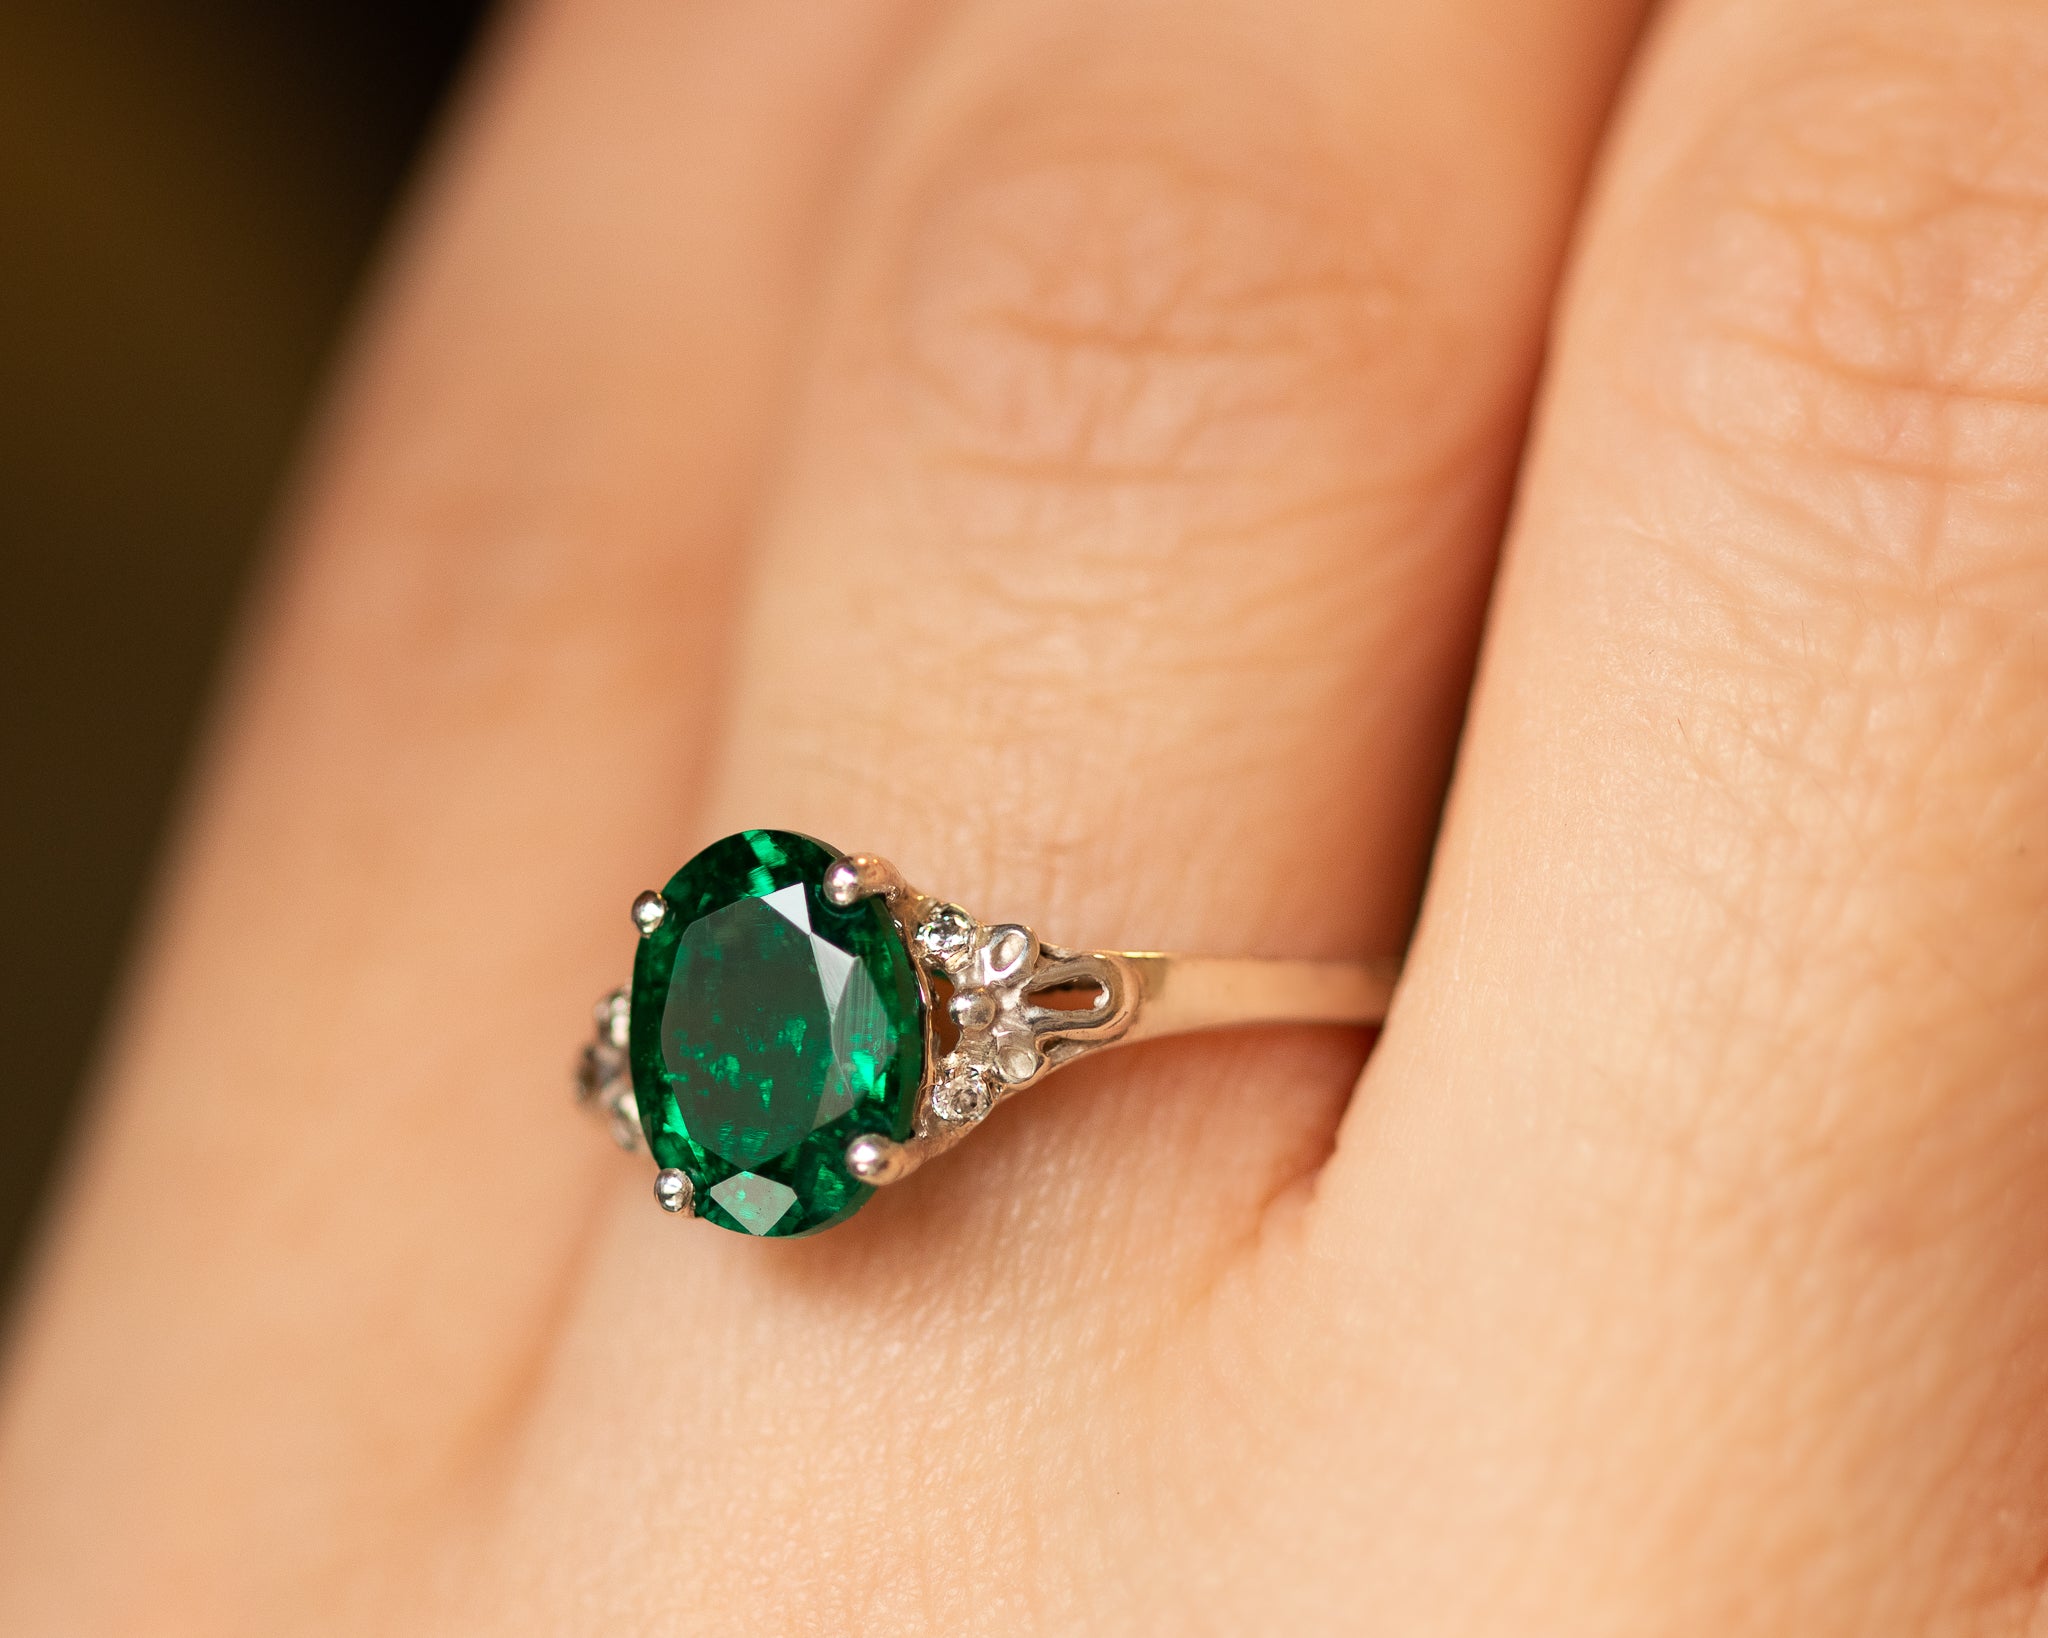 Alexandrite and emerald engagement ring. : r/EngagementRings